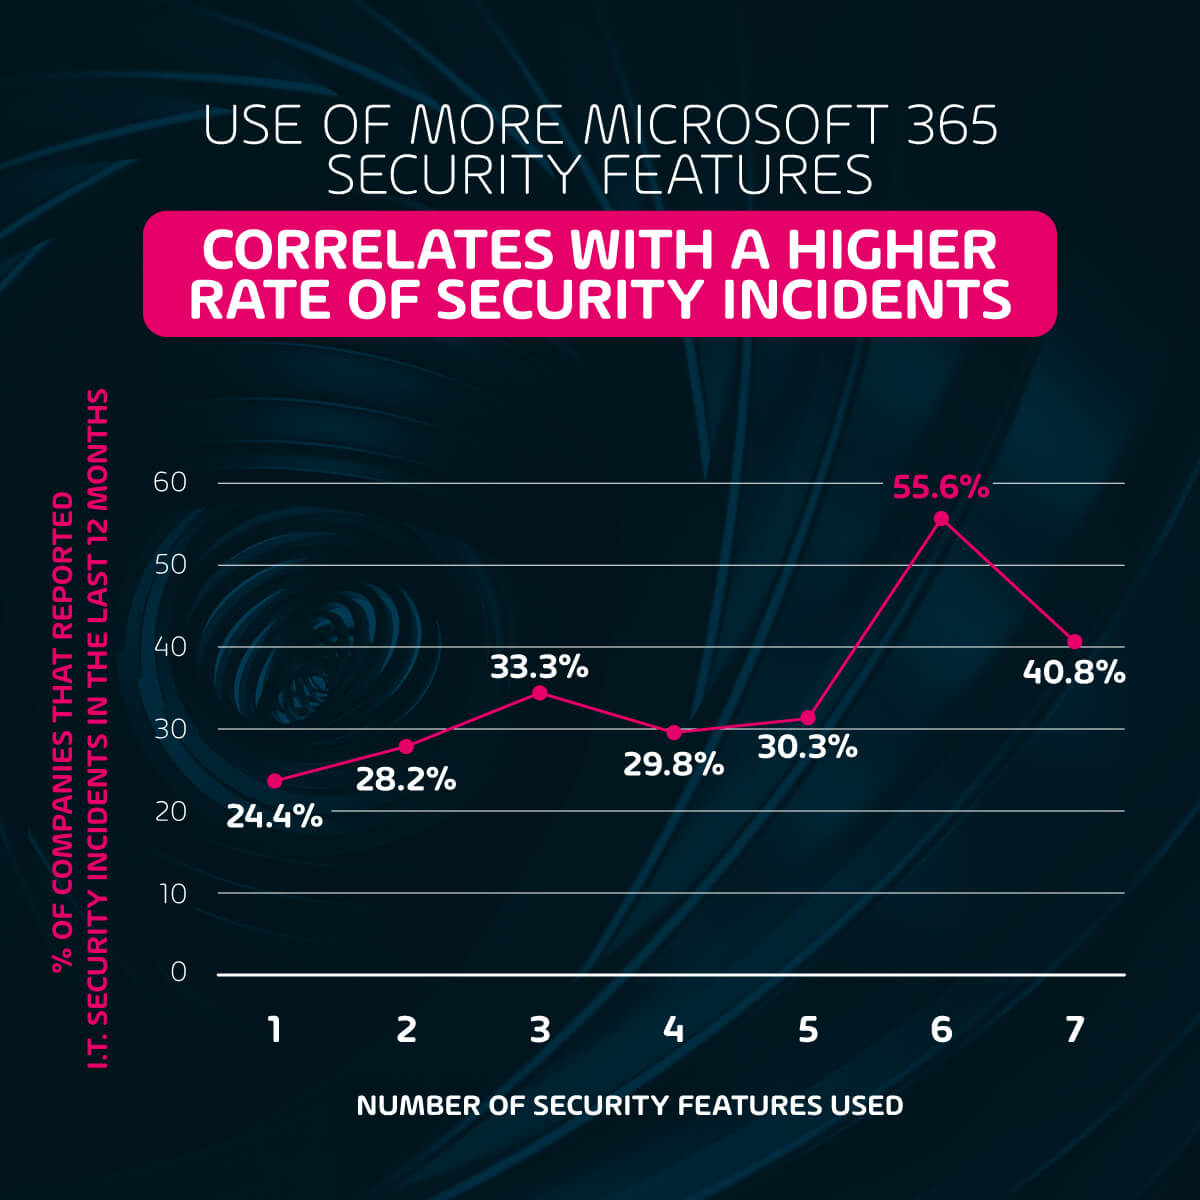 Use of more Microsoft 365 security features correlates with a higher rate of security incidents